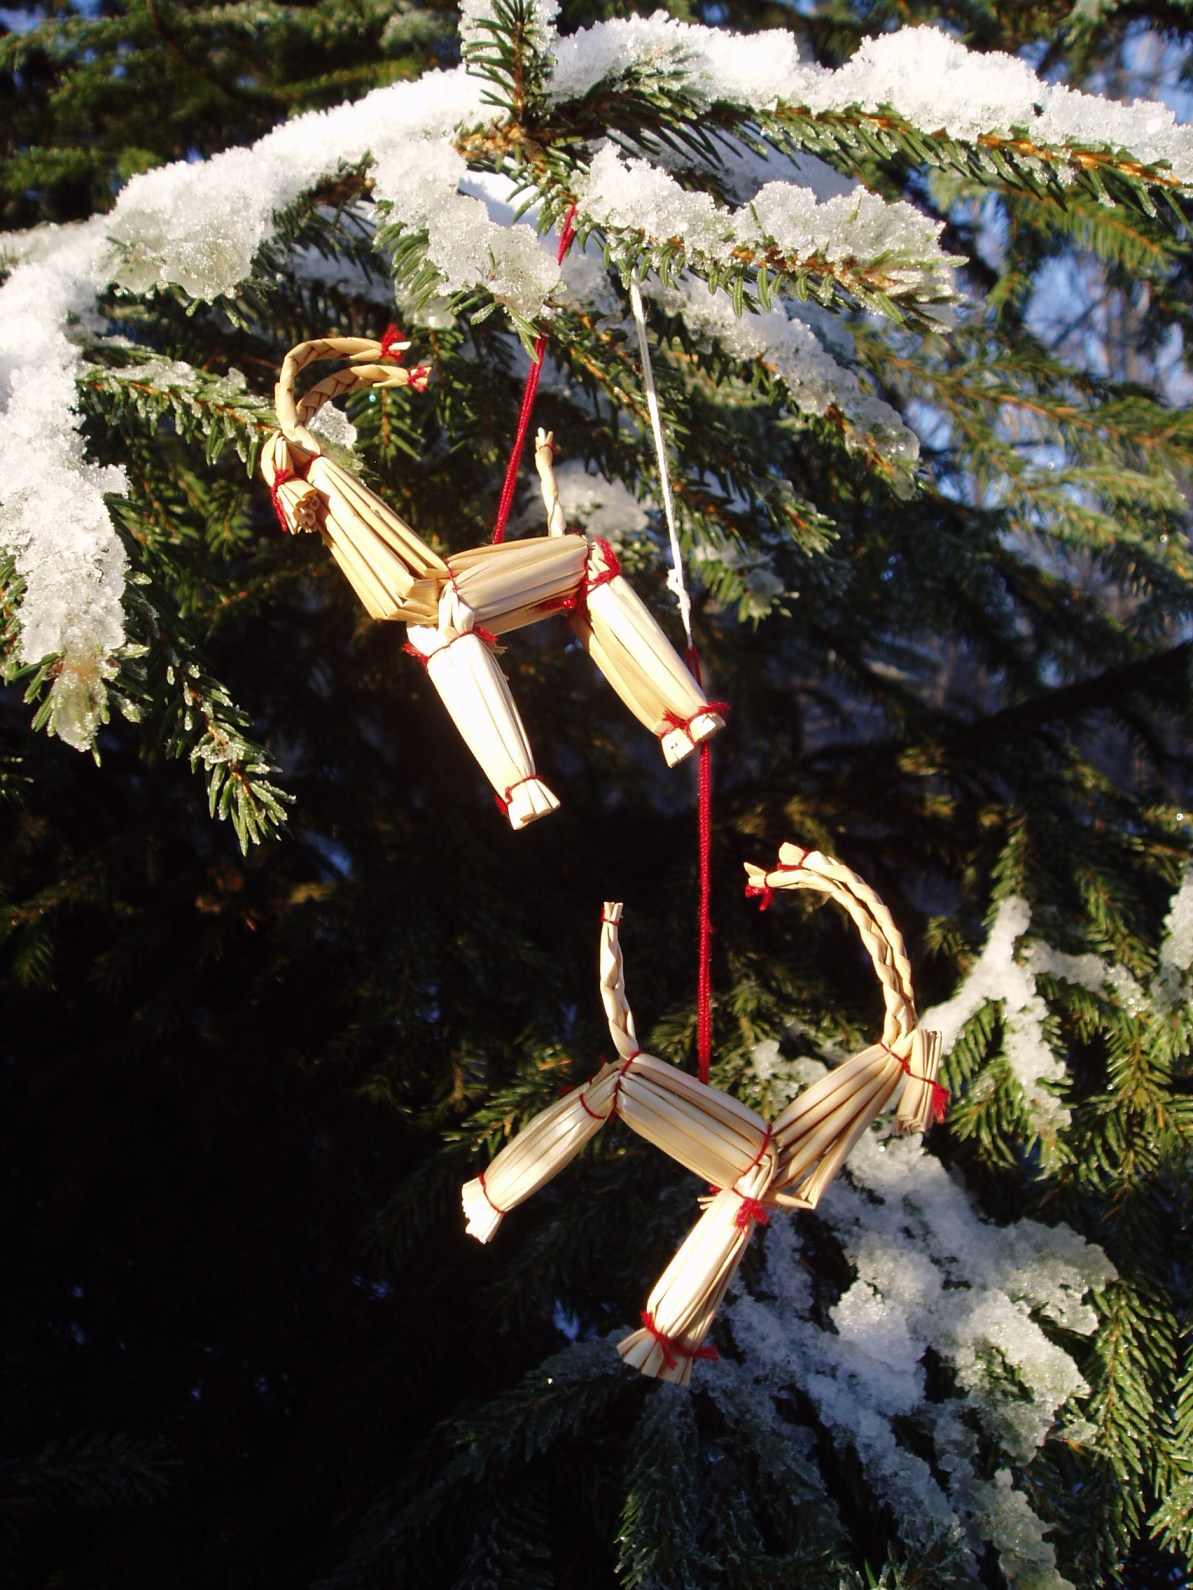 A close-up of two Christmas goat decorations. Udo Schröter (CC BY 2.0) https://www.flickr.com/photos/nordelch/386418158/